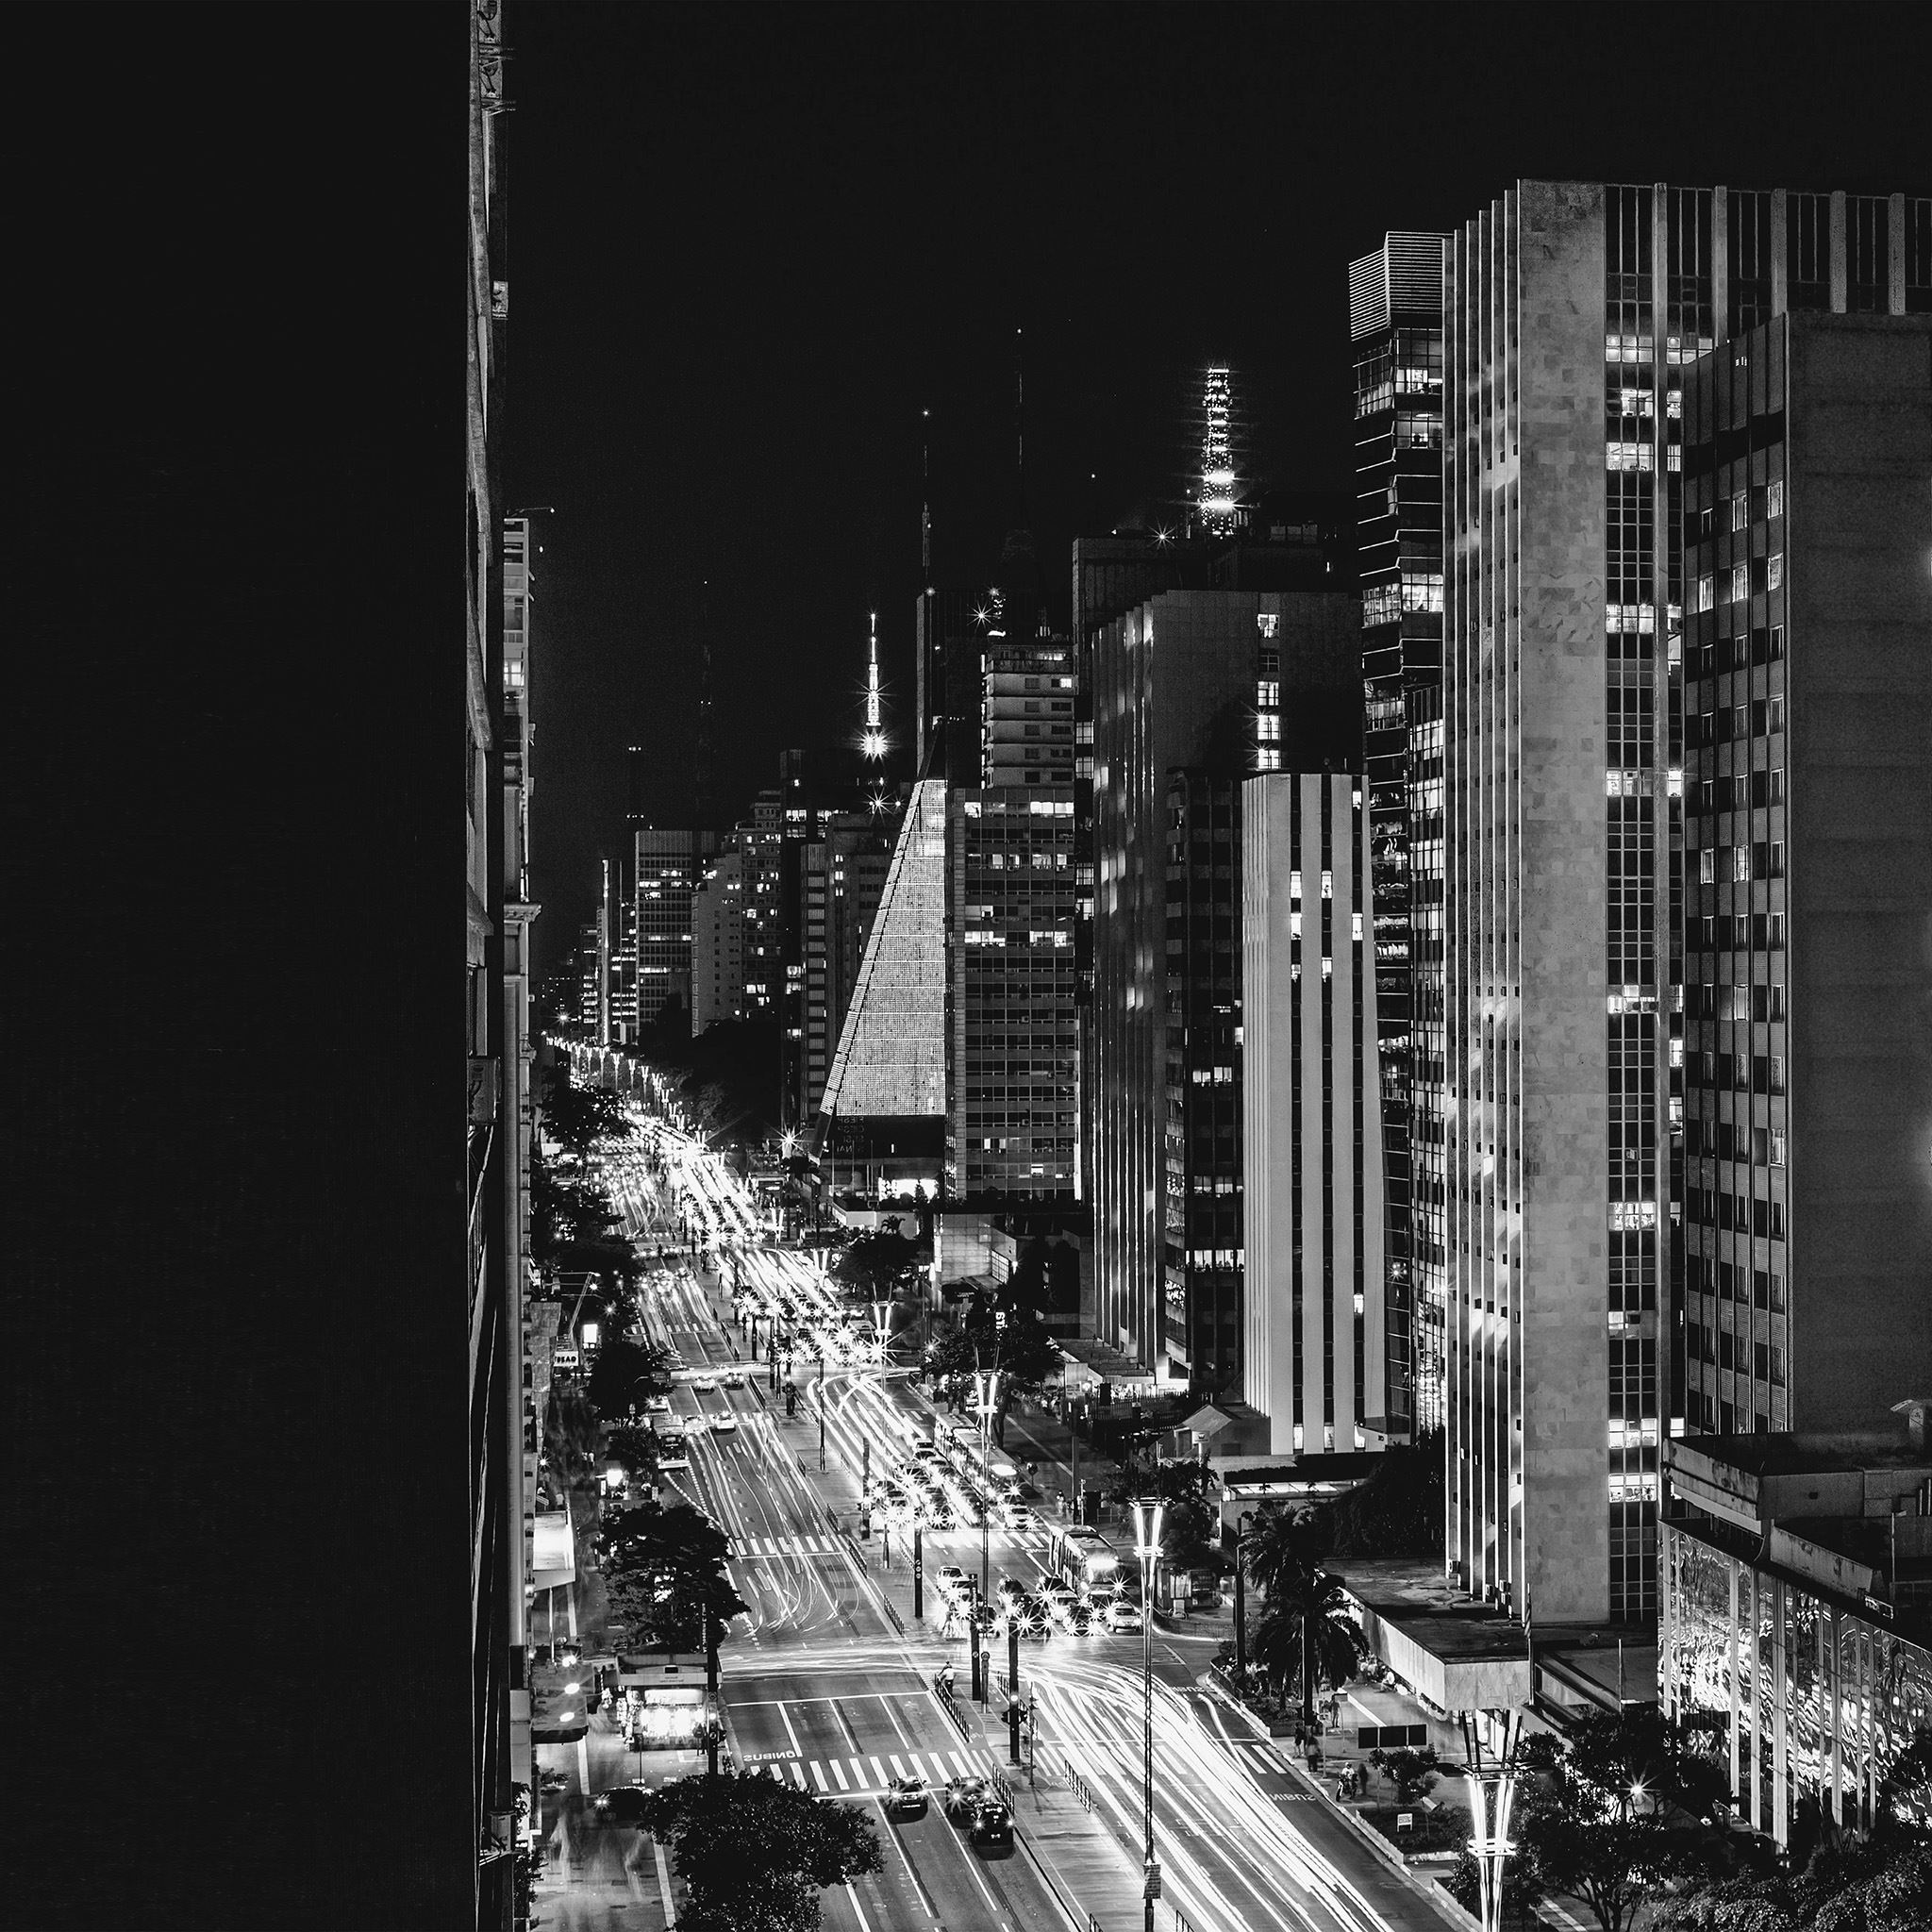 City Street Black And White Wallpapers